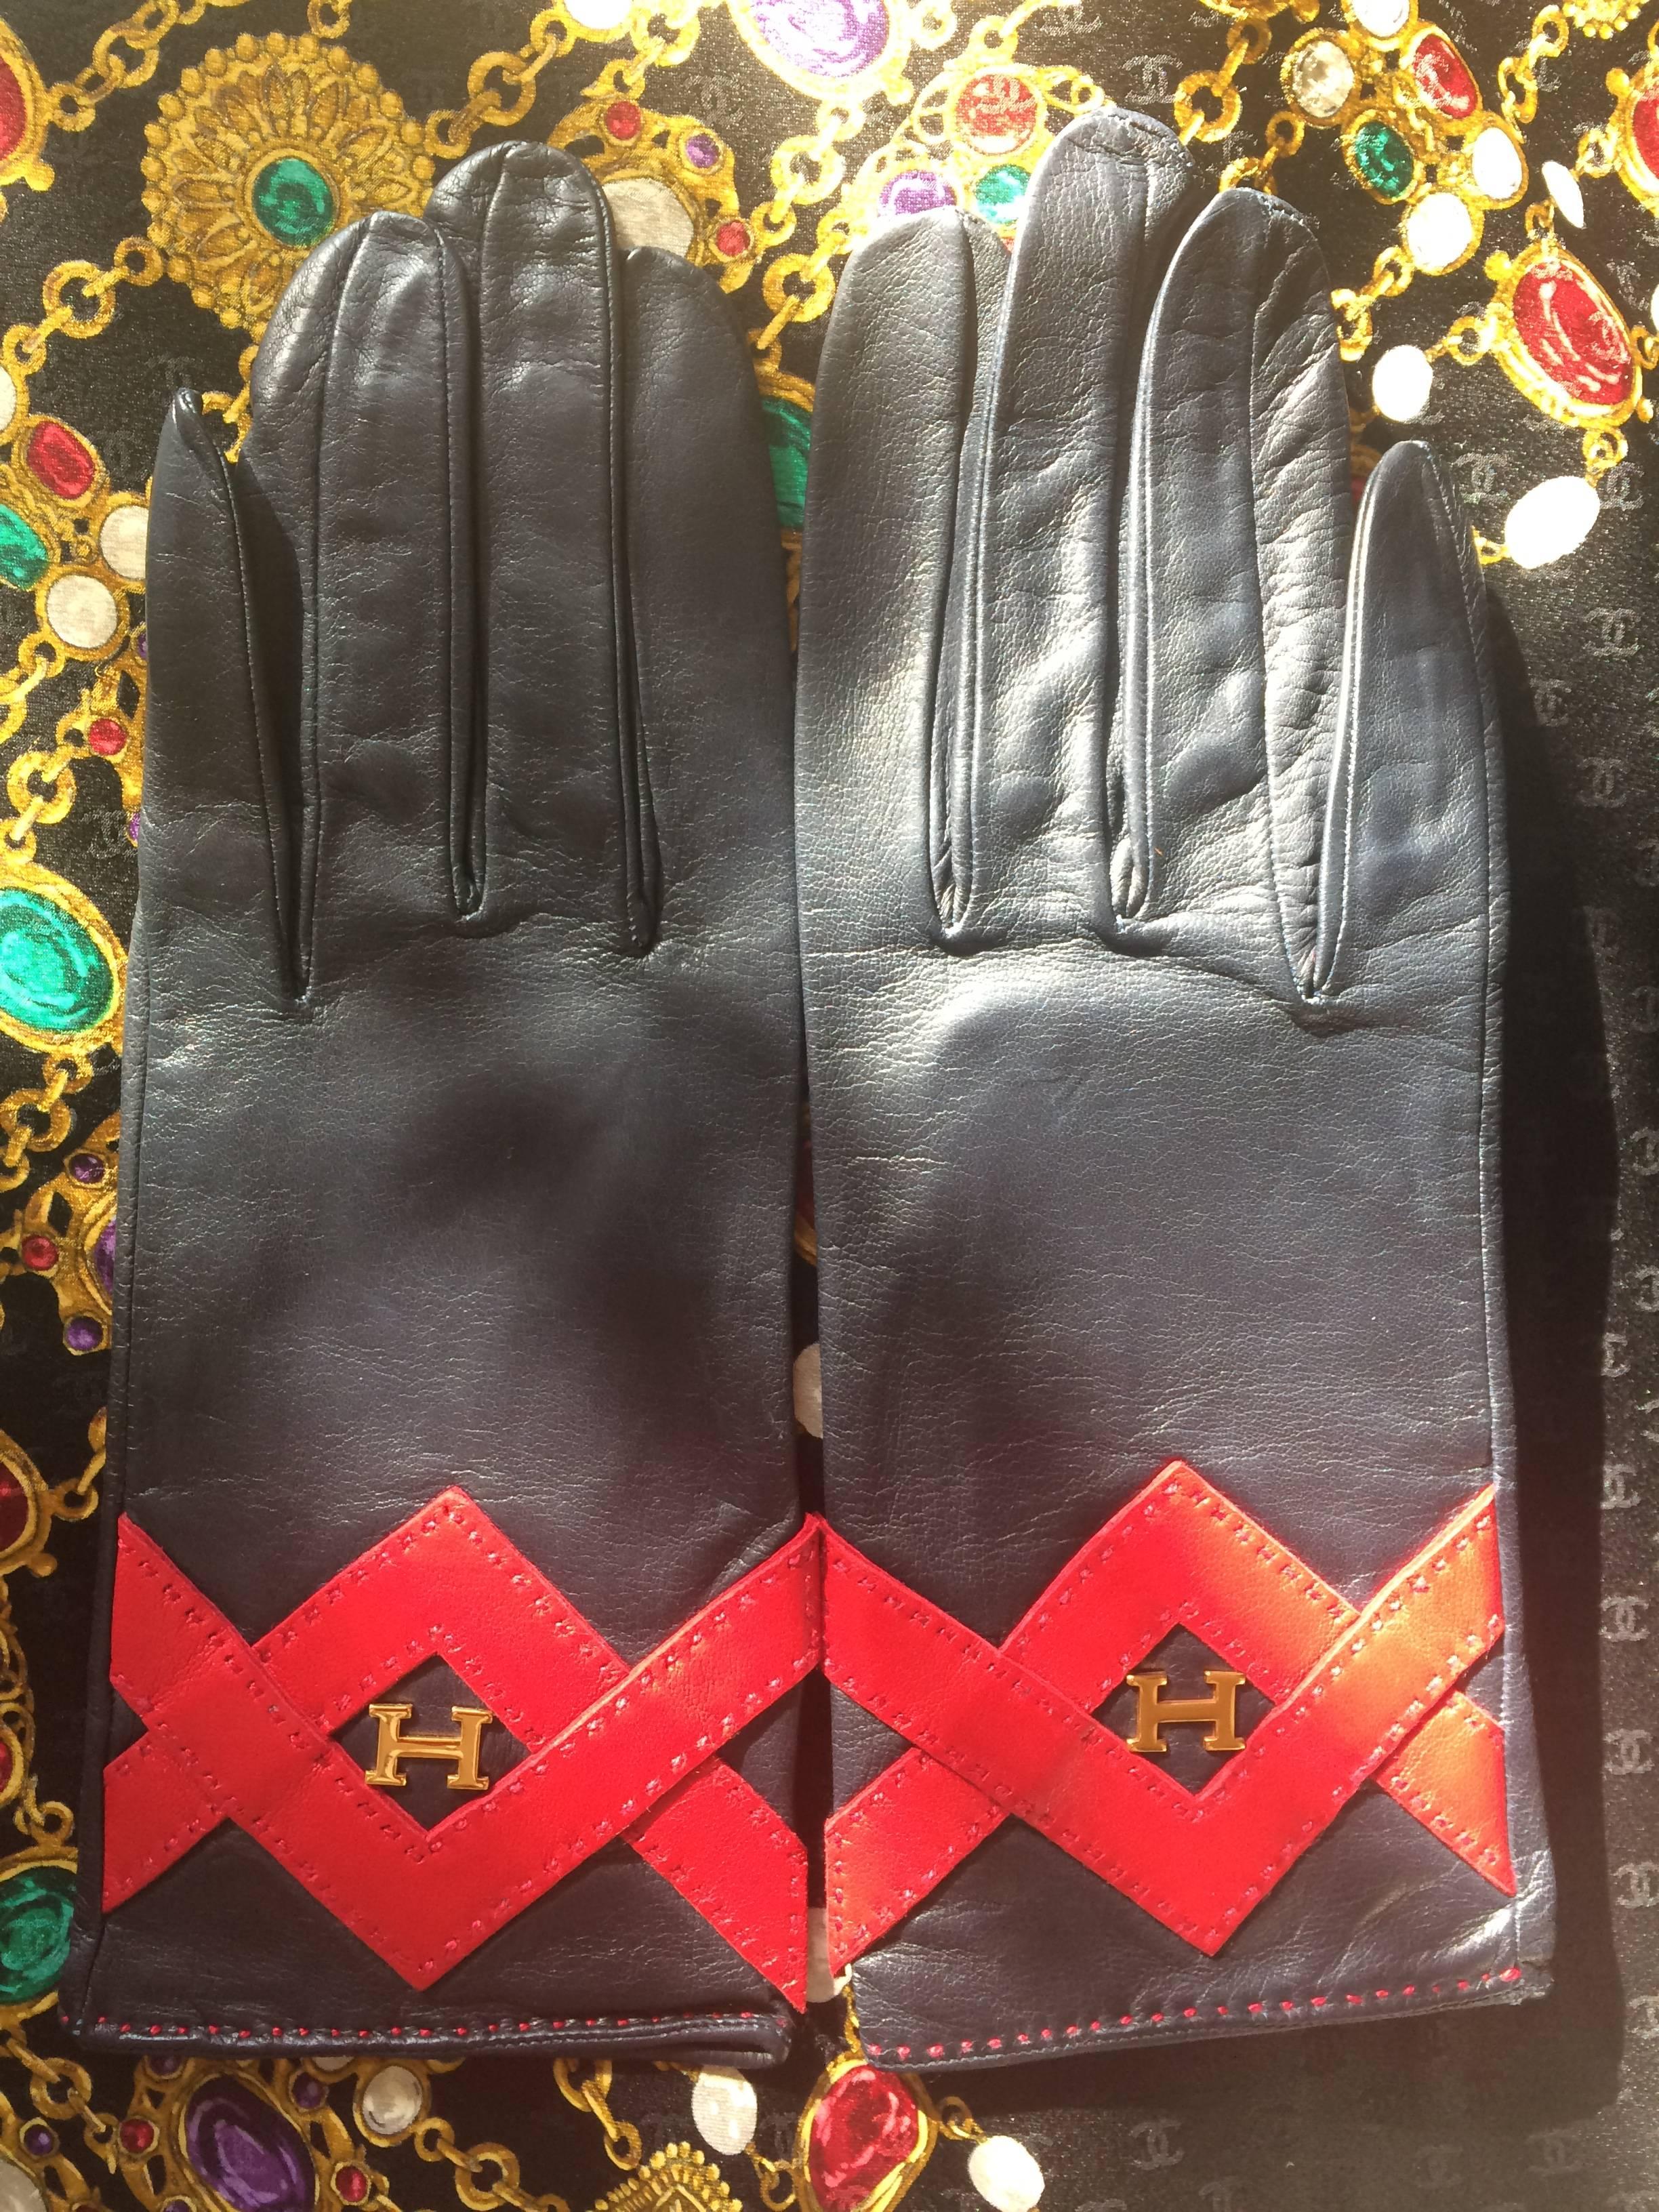 Vintage HERMES black lambskin gloves with golden　H logo with red triangle stitch design. Perfect vintage gift for the season. size 7.5

Introducing a rare pair of Hermes genuine black lambskin gloves from the early 90's. Size 7.5 
Beautiful